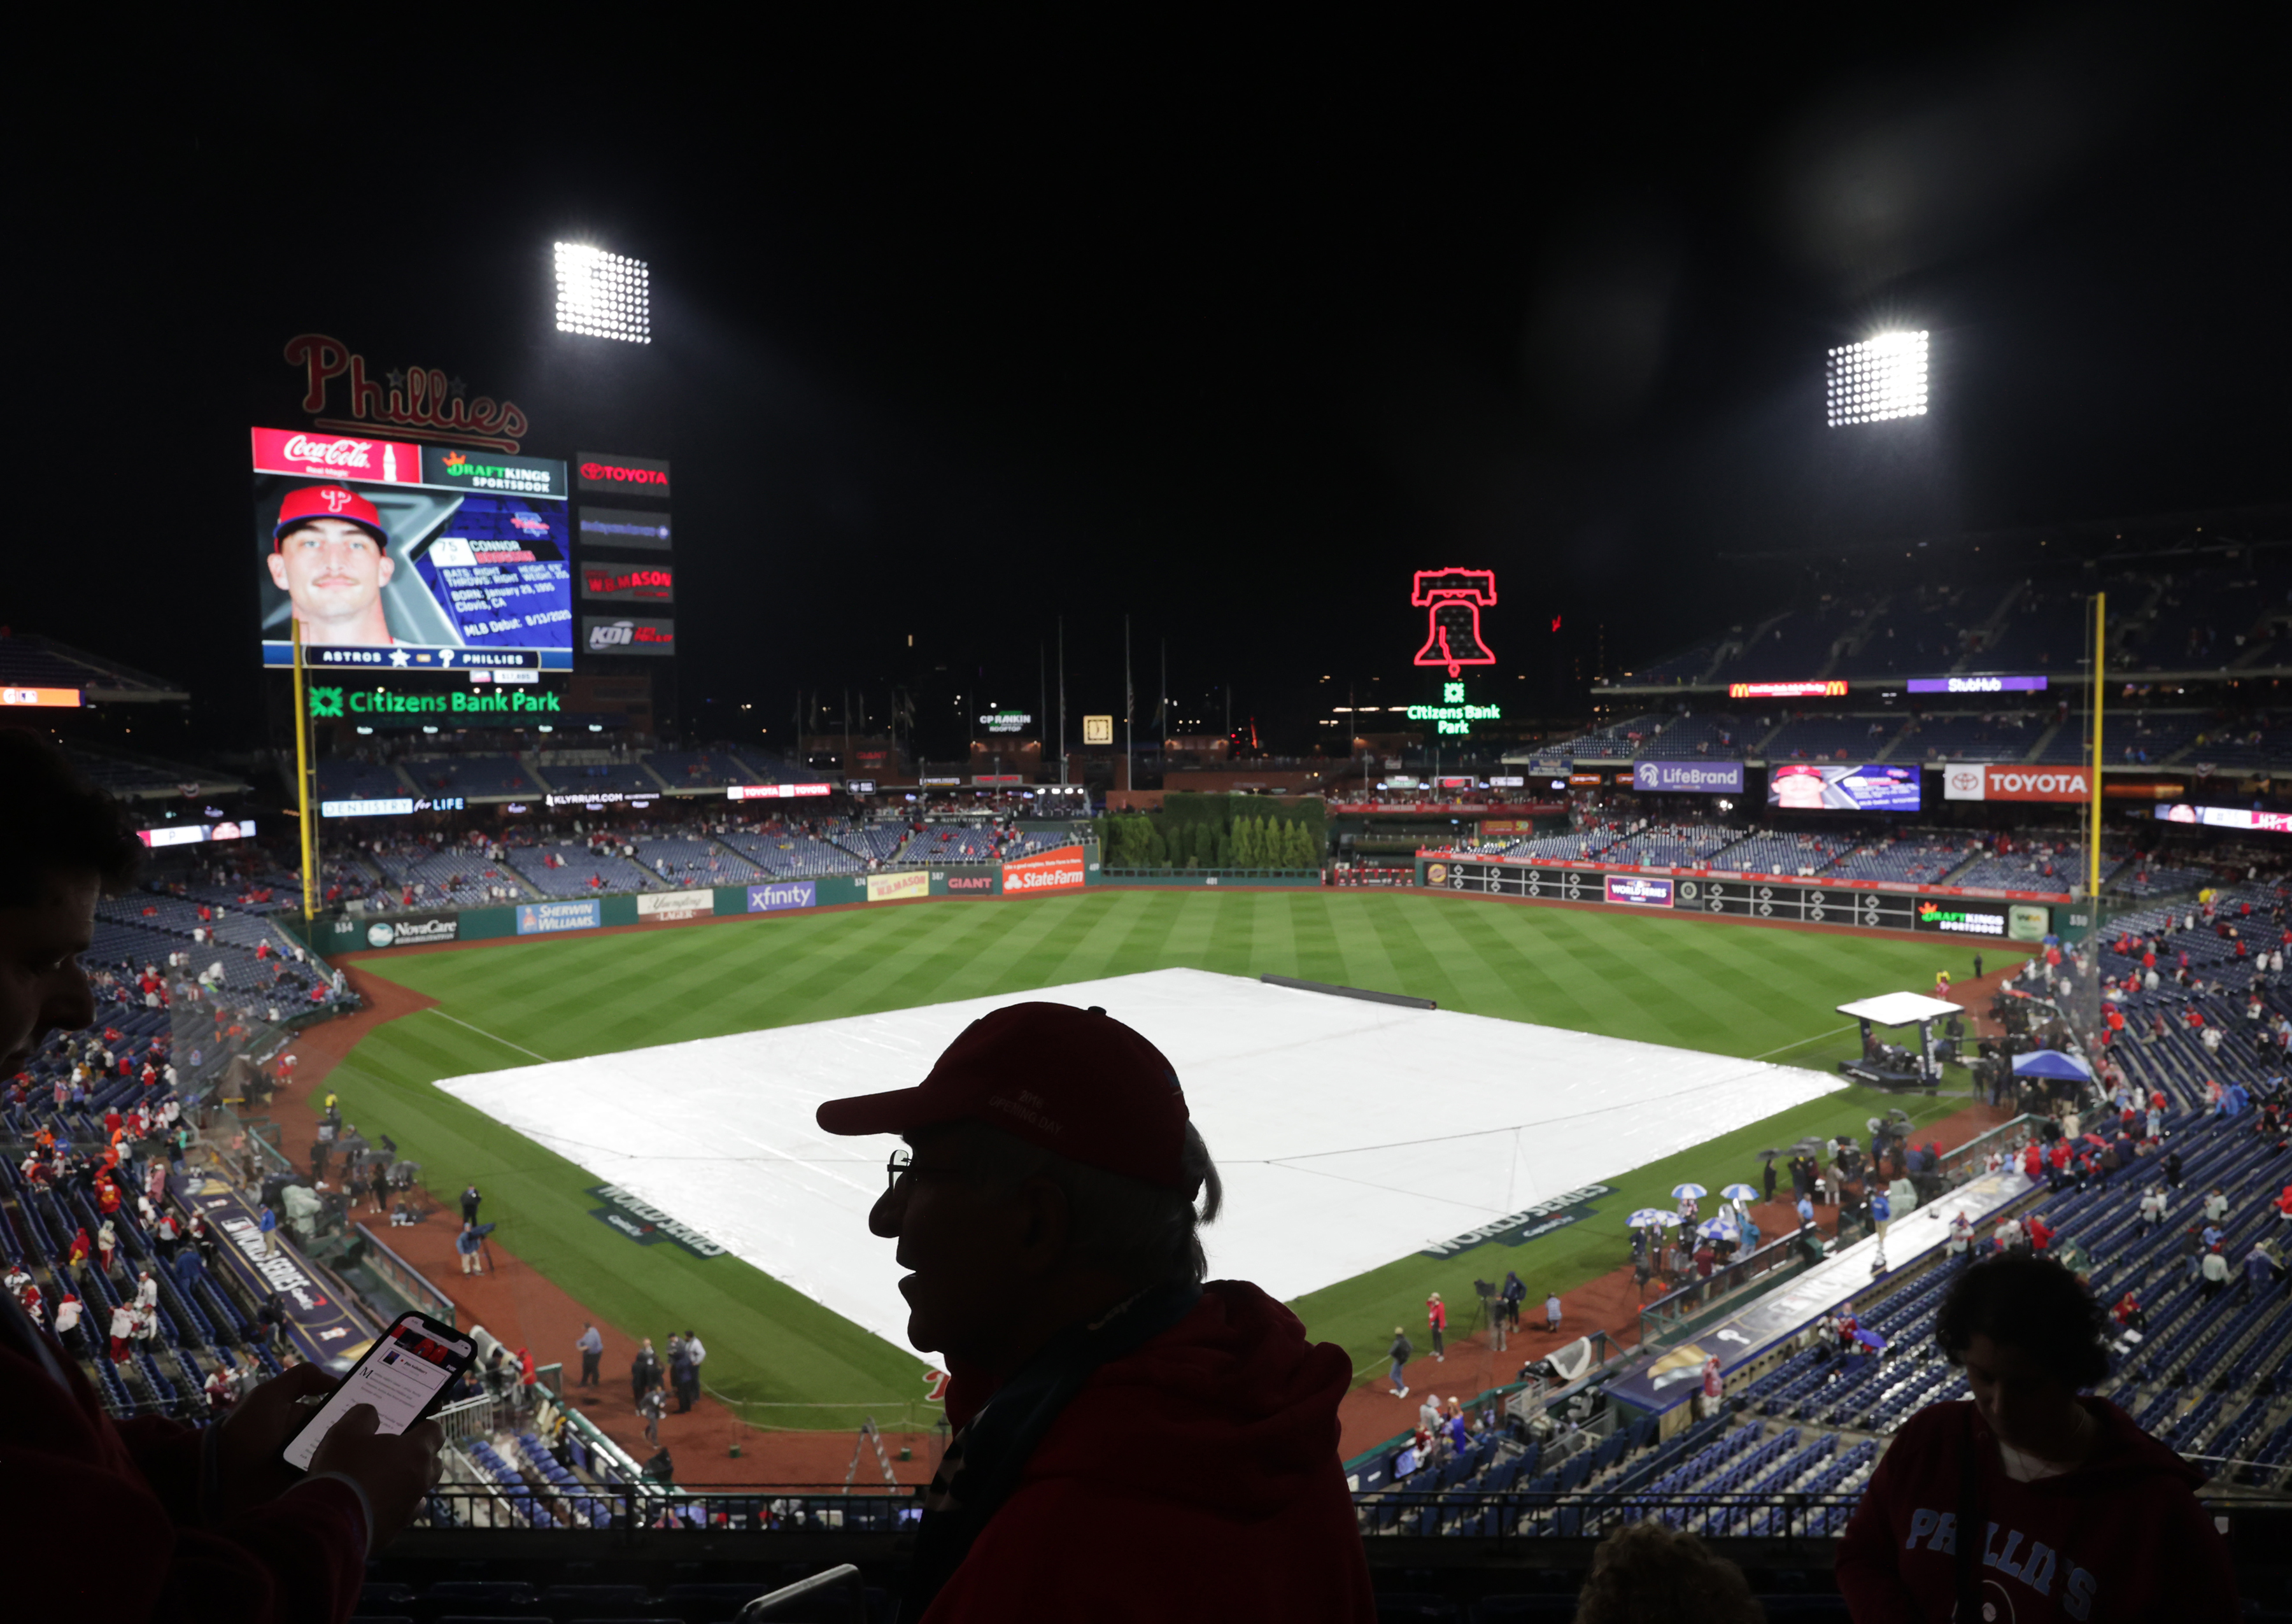 Seranthony Dominguez costs Phillies pitching through rain in Game